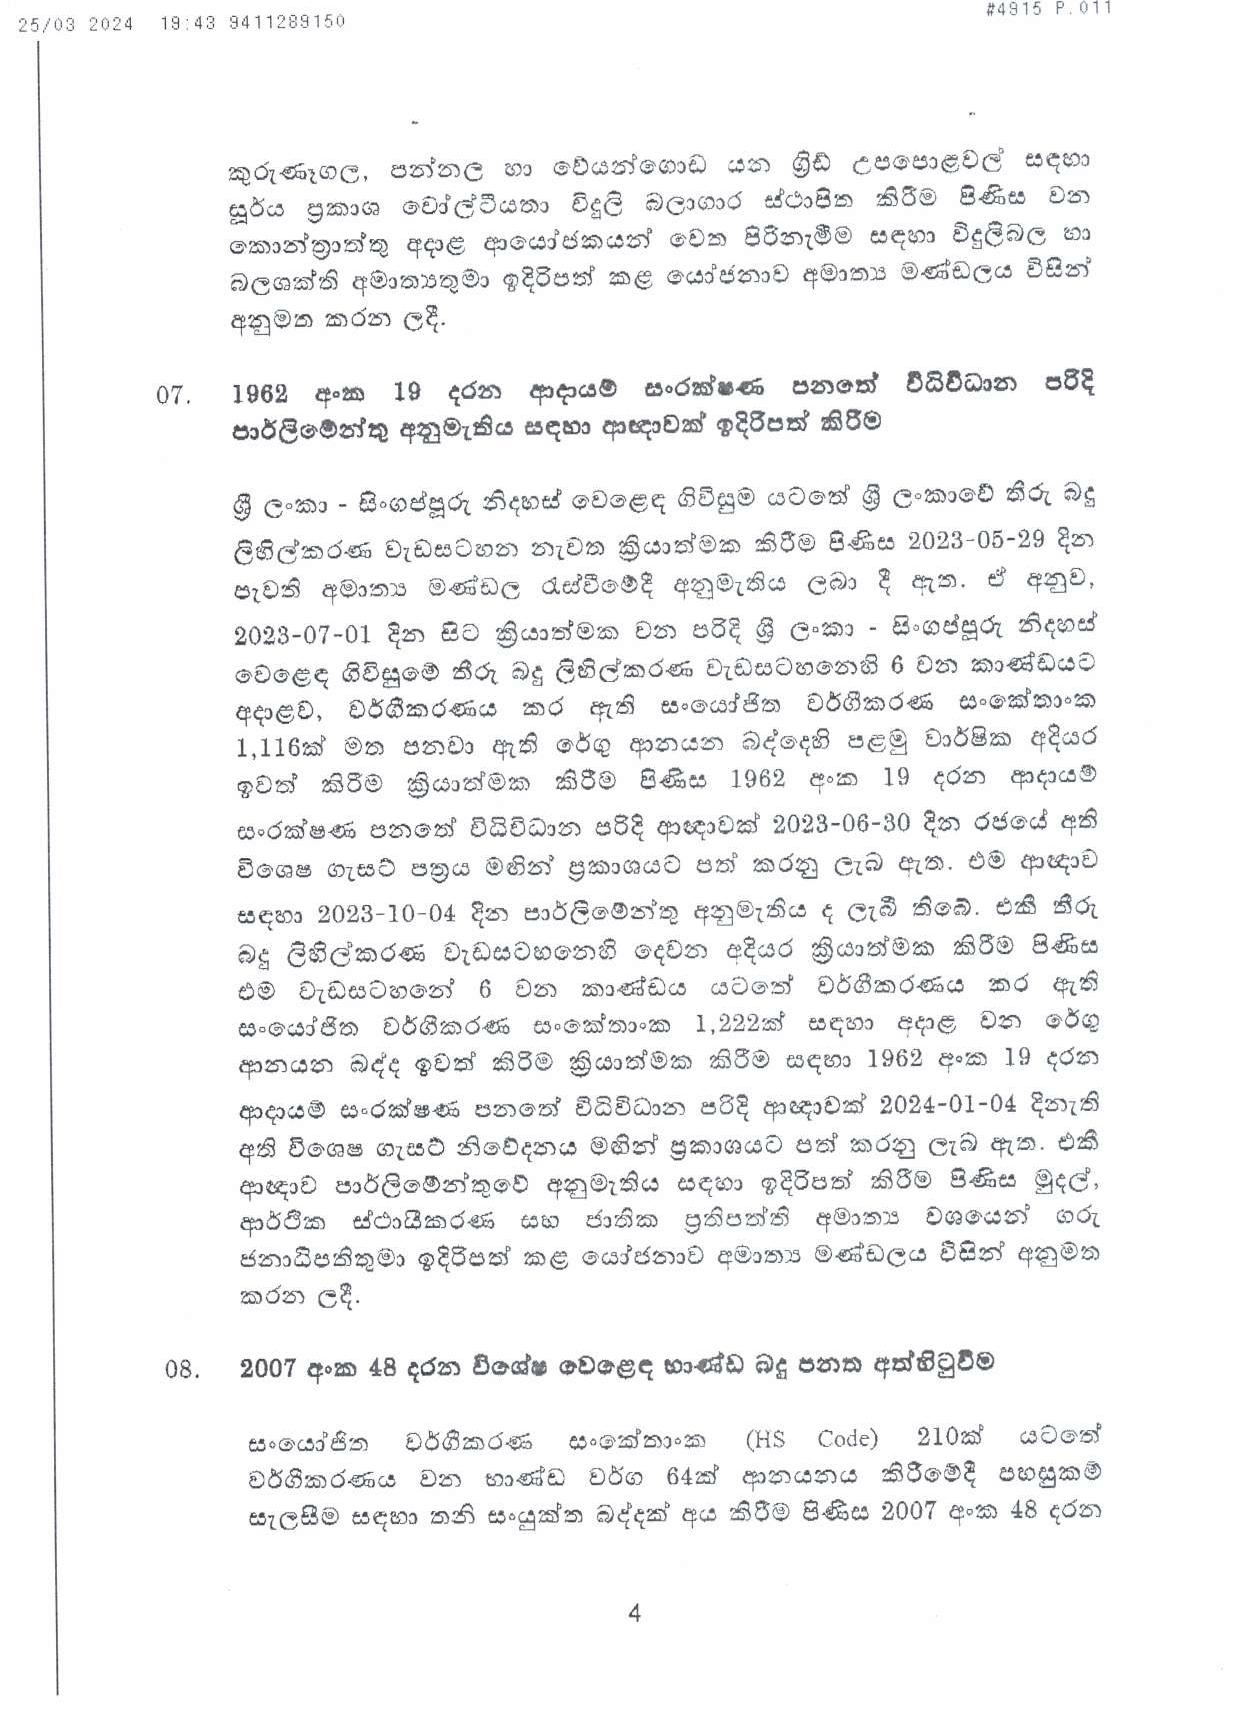 Cabinet Decision on 25.03.2024 page 004